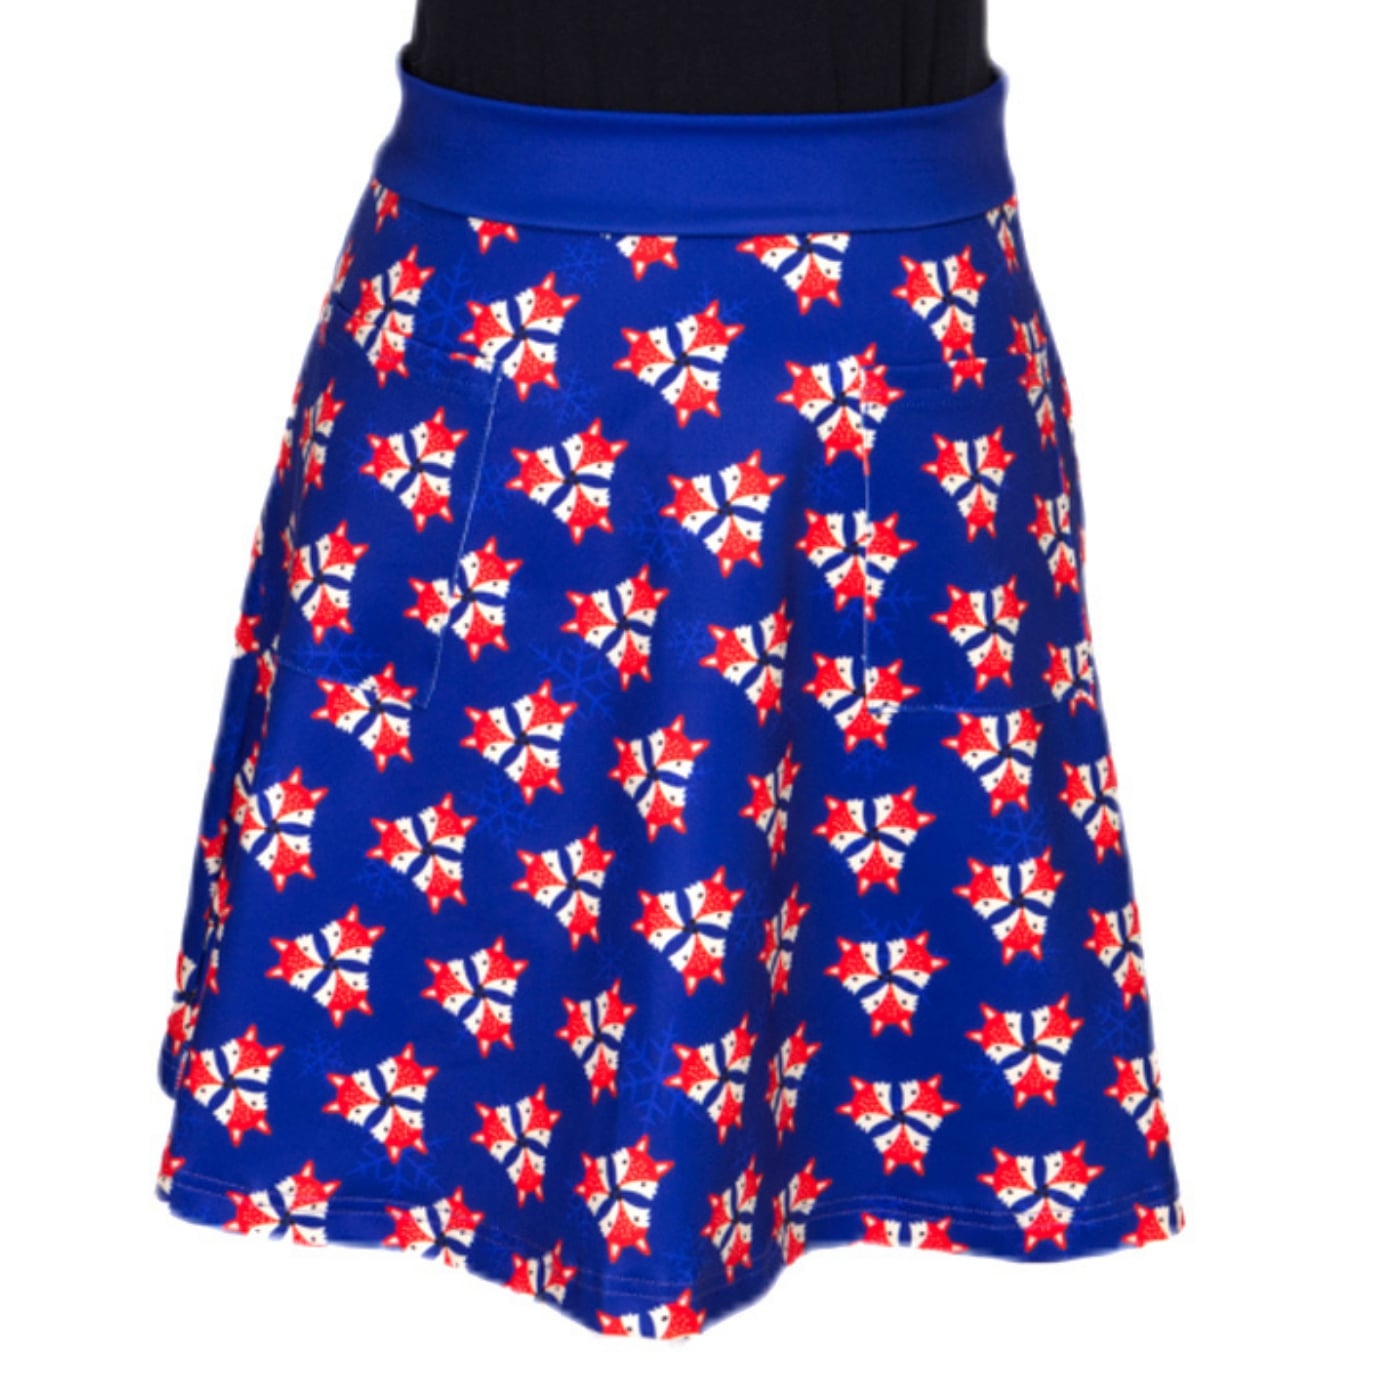 Howard Short Skirt by RainbowsAndFairies.com.au (Red Fox - Foxy - Snowflake - Blue - Kitsch - Aline Skirt With Pockets - Vintage Inspired) - SKU: CL_SHORT_HOWIE_ORG - Pic-02